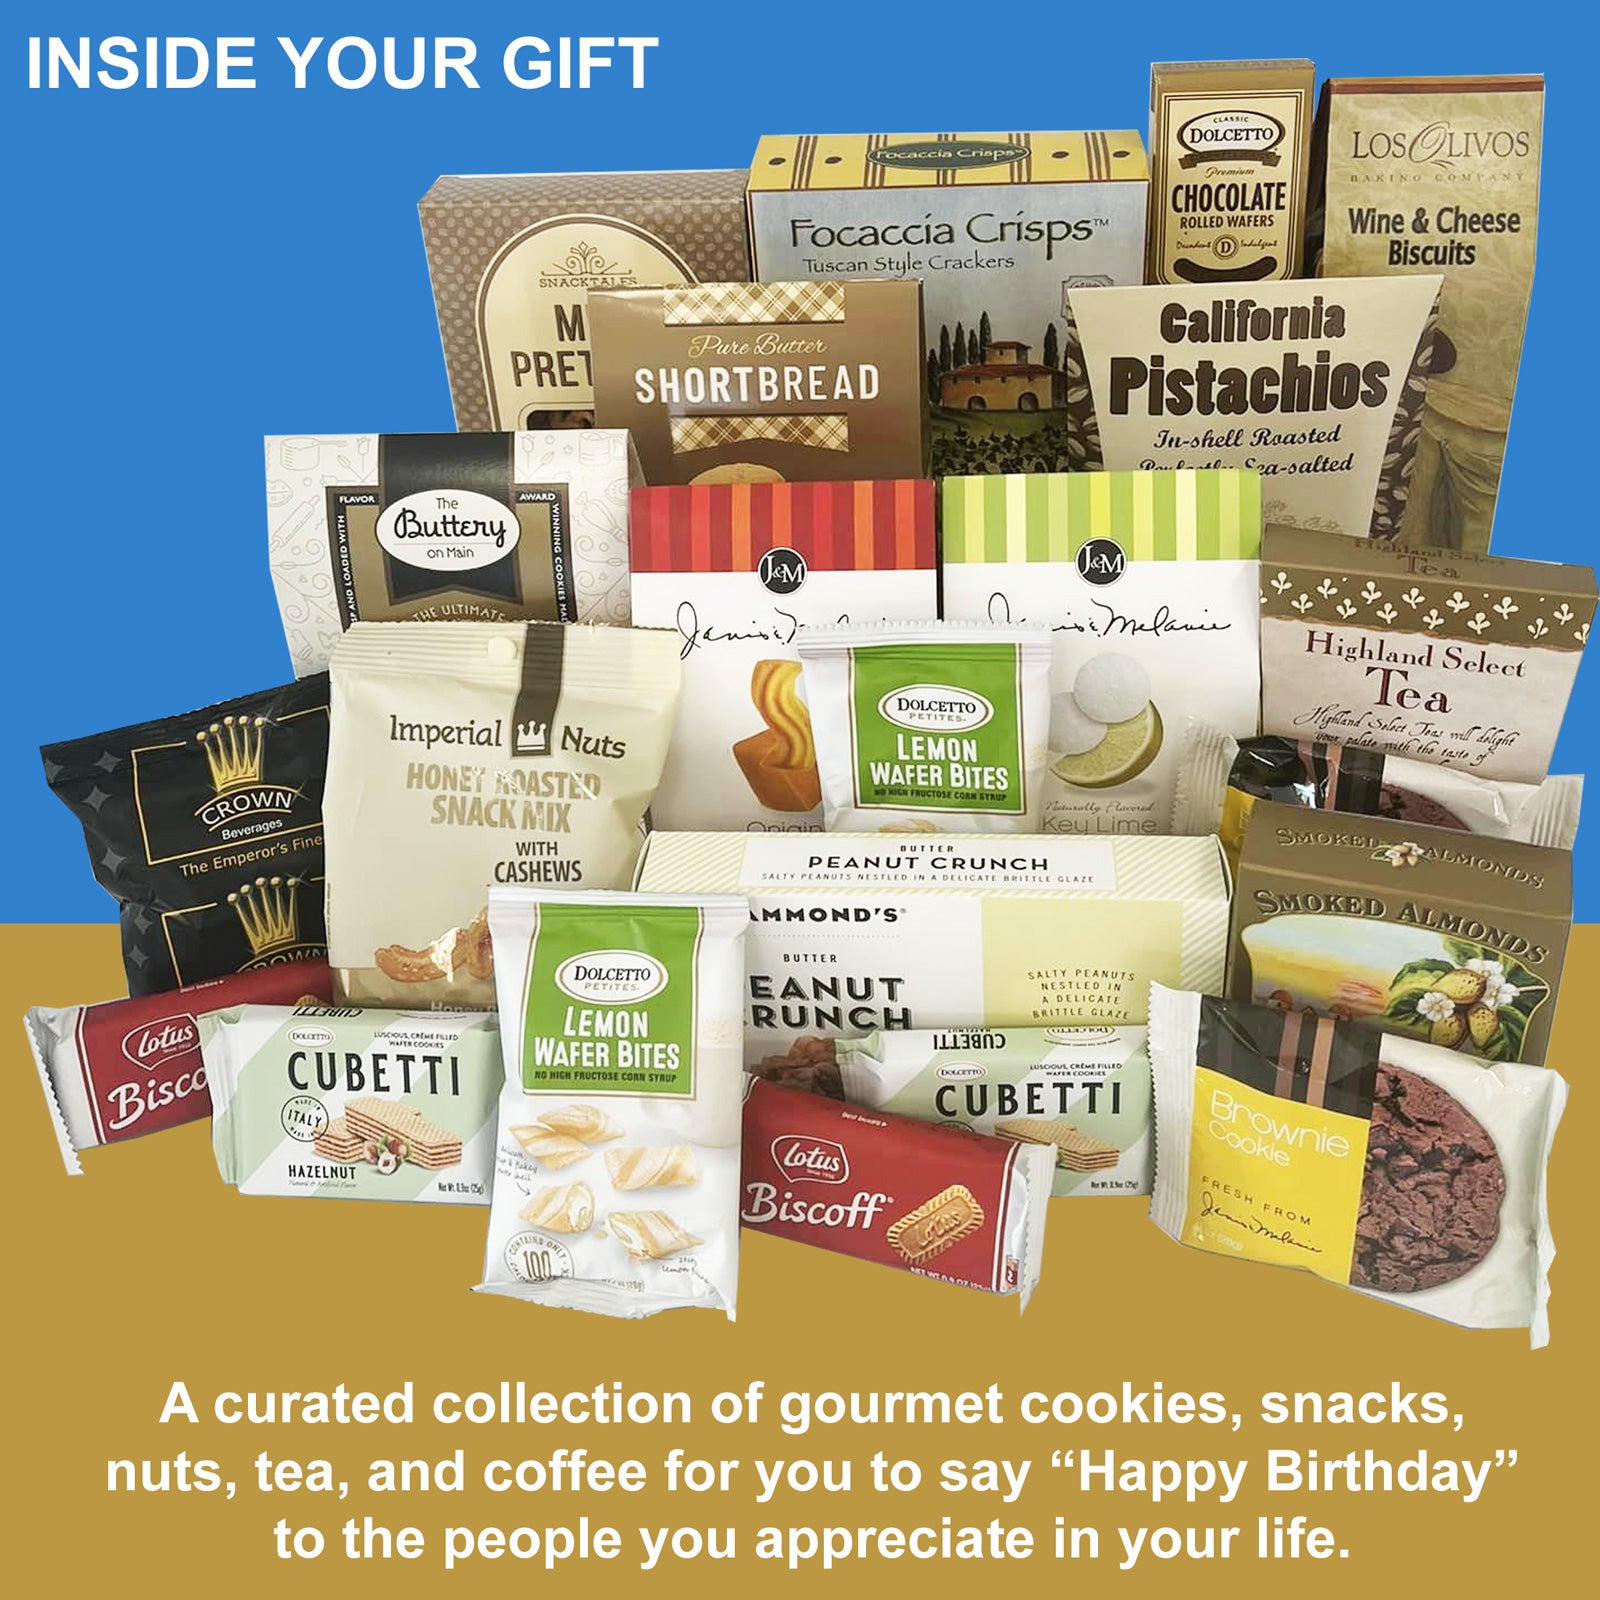 Grand Gourmet Birthday Gift Basket for Men, Women, Friends, Family, Business Includes Birthday Card and Personal Note